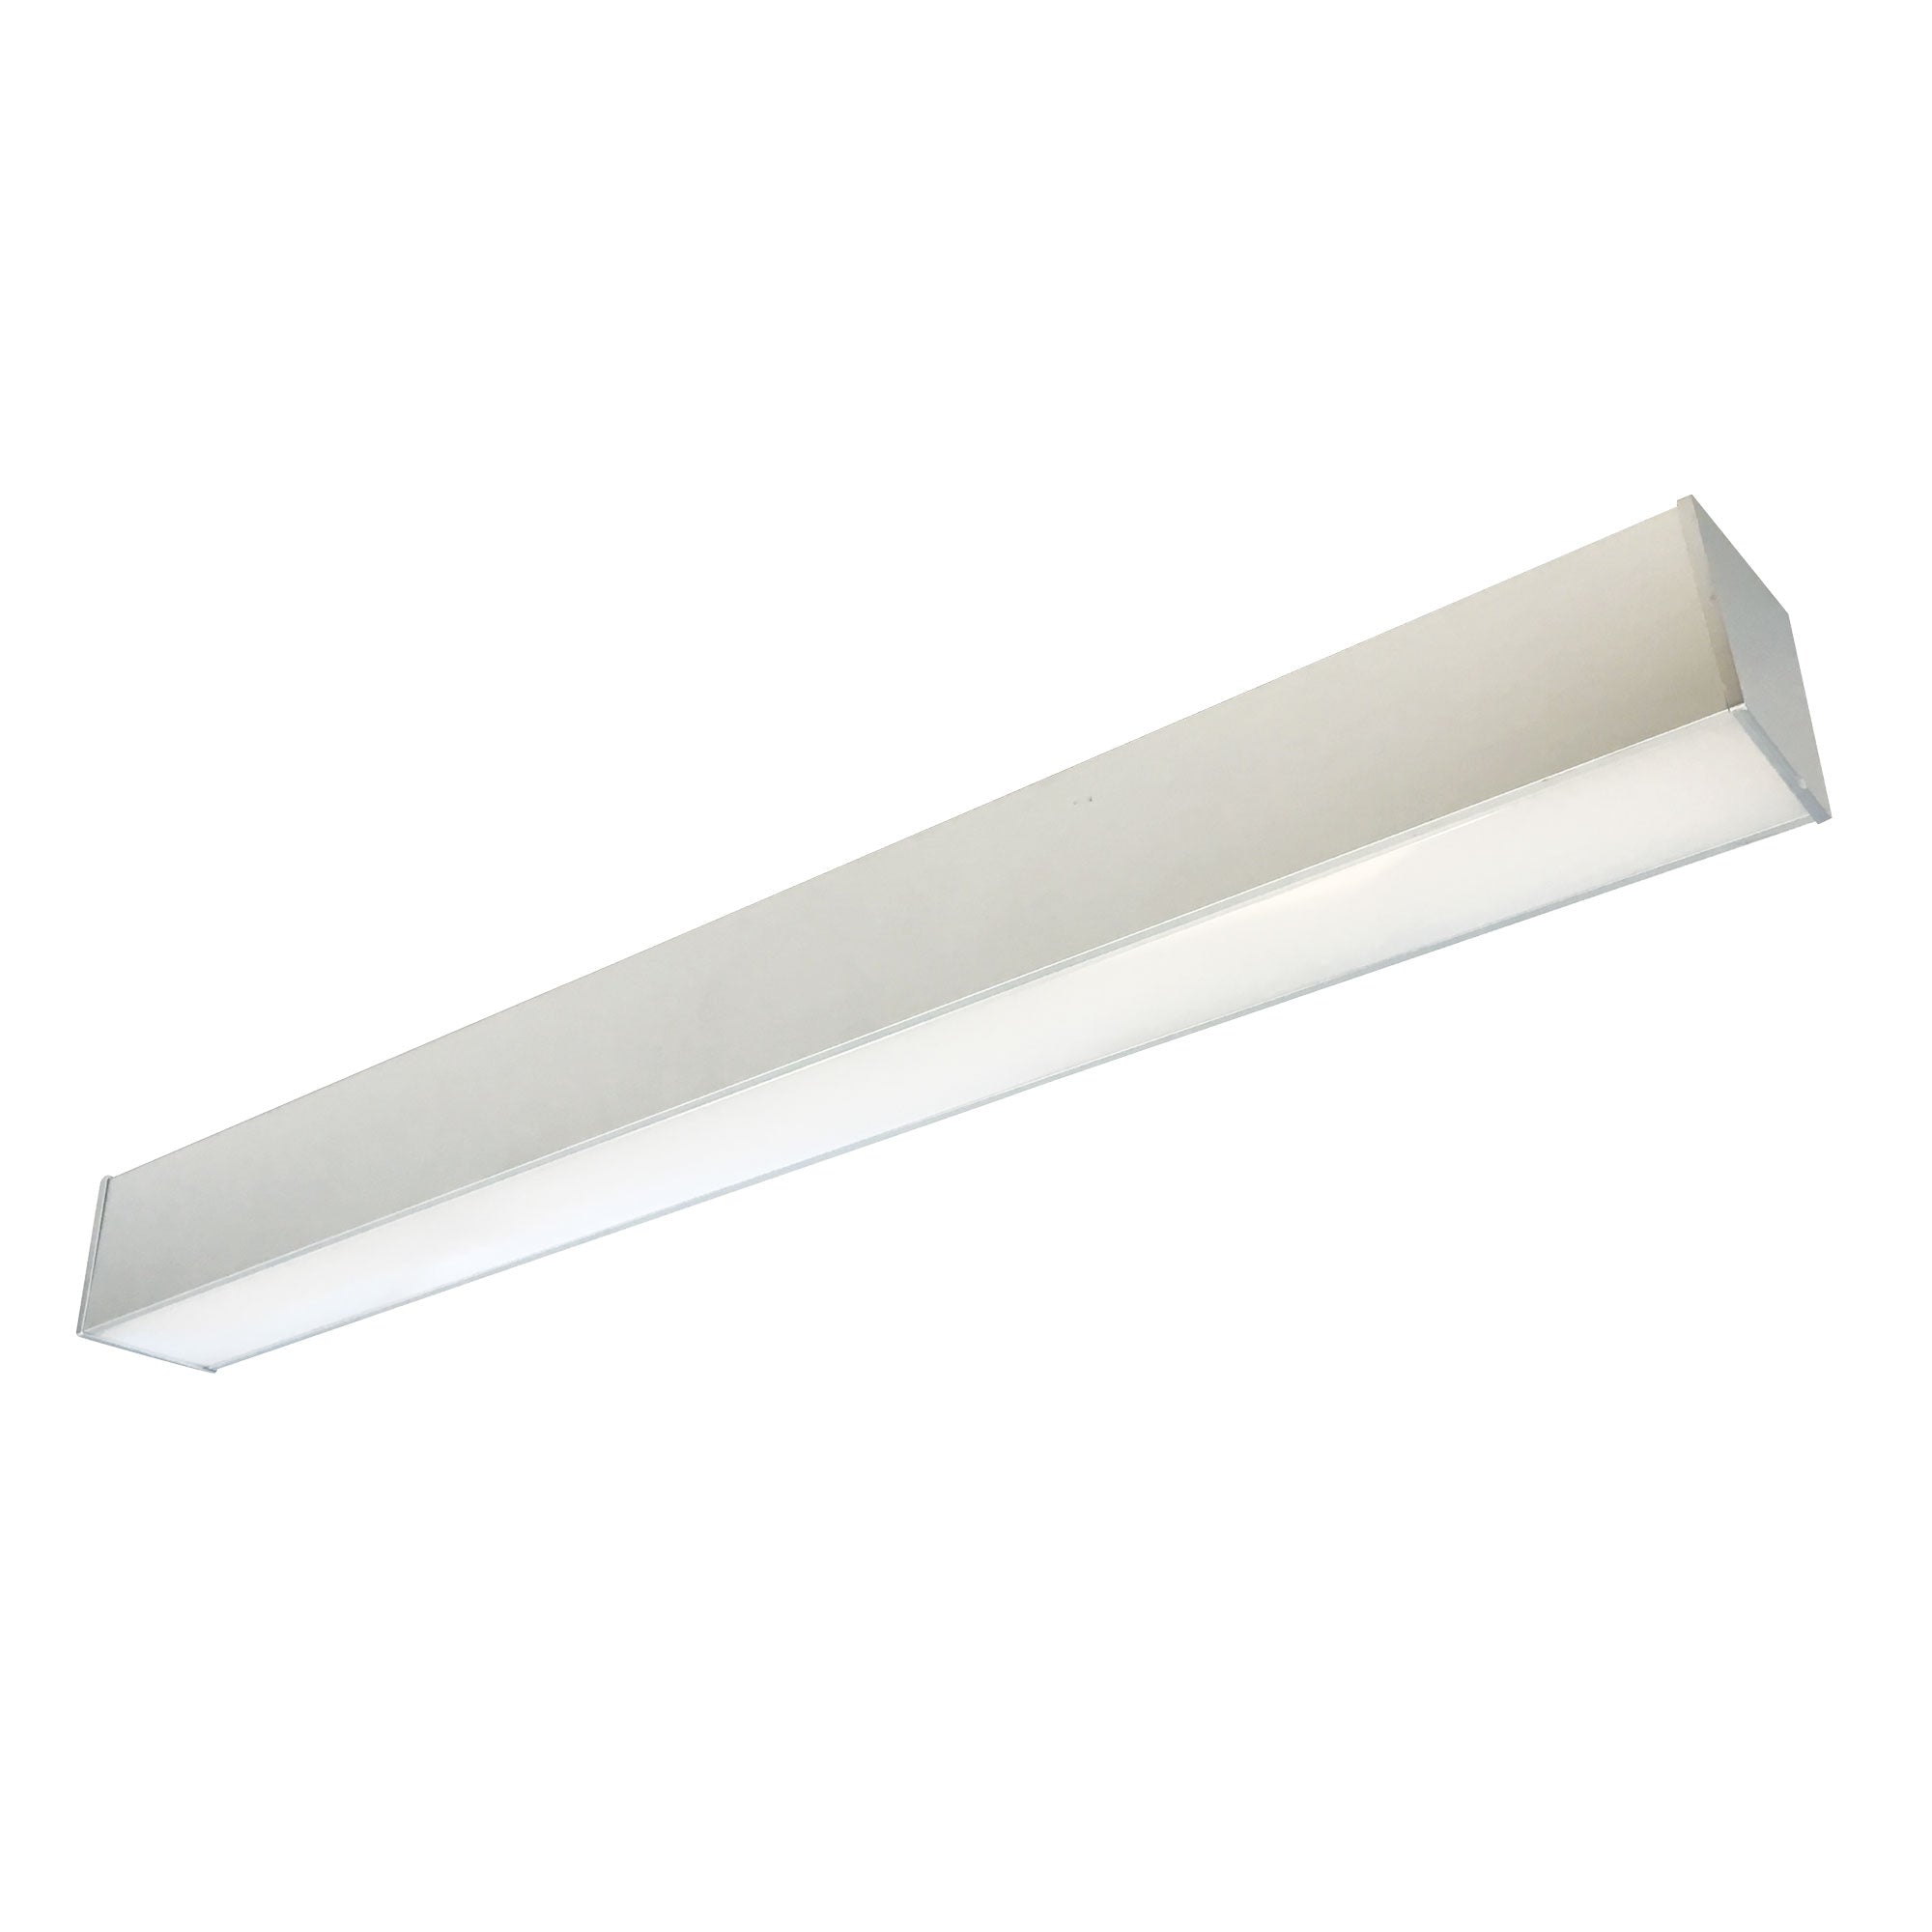 Nora Lighting NLIN-81040A/A - Linear - 8' L-Line LED Direct Linear w/ Dedicated CCT, 8400lm / 4000K, Aluminum Finish